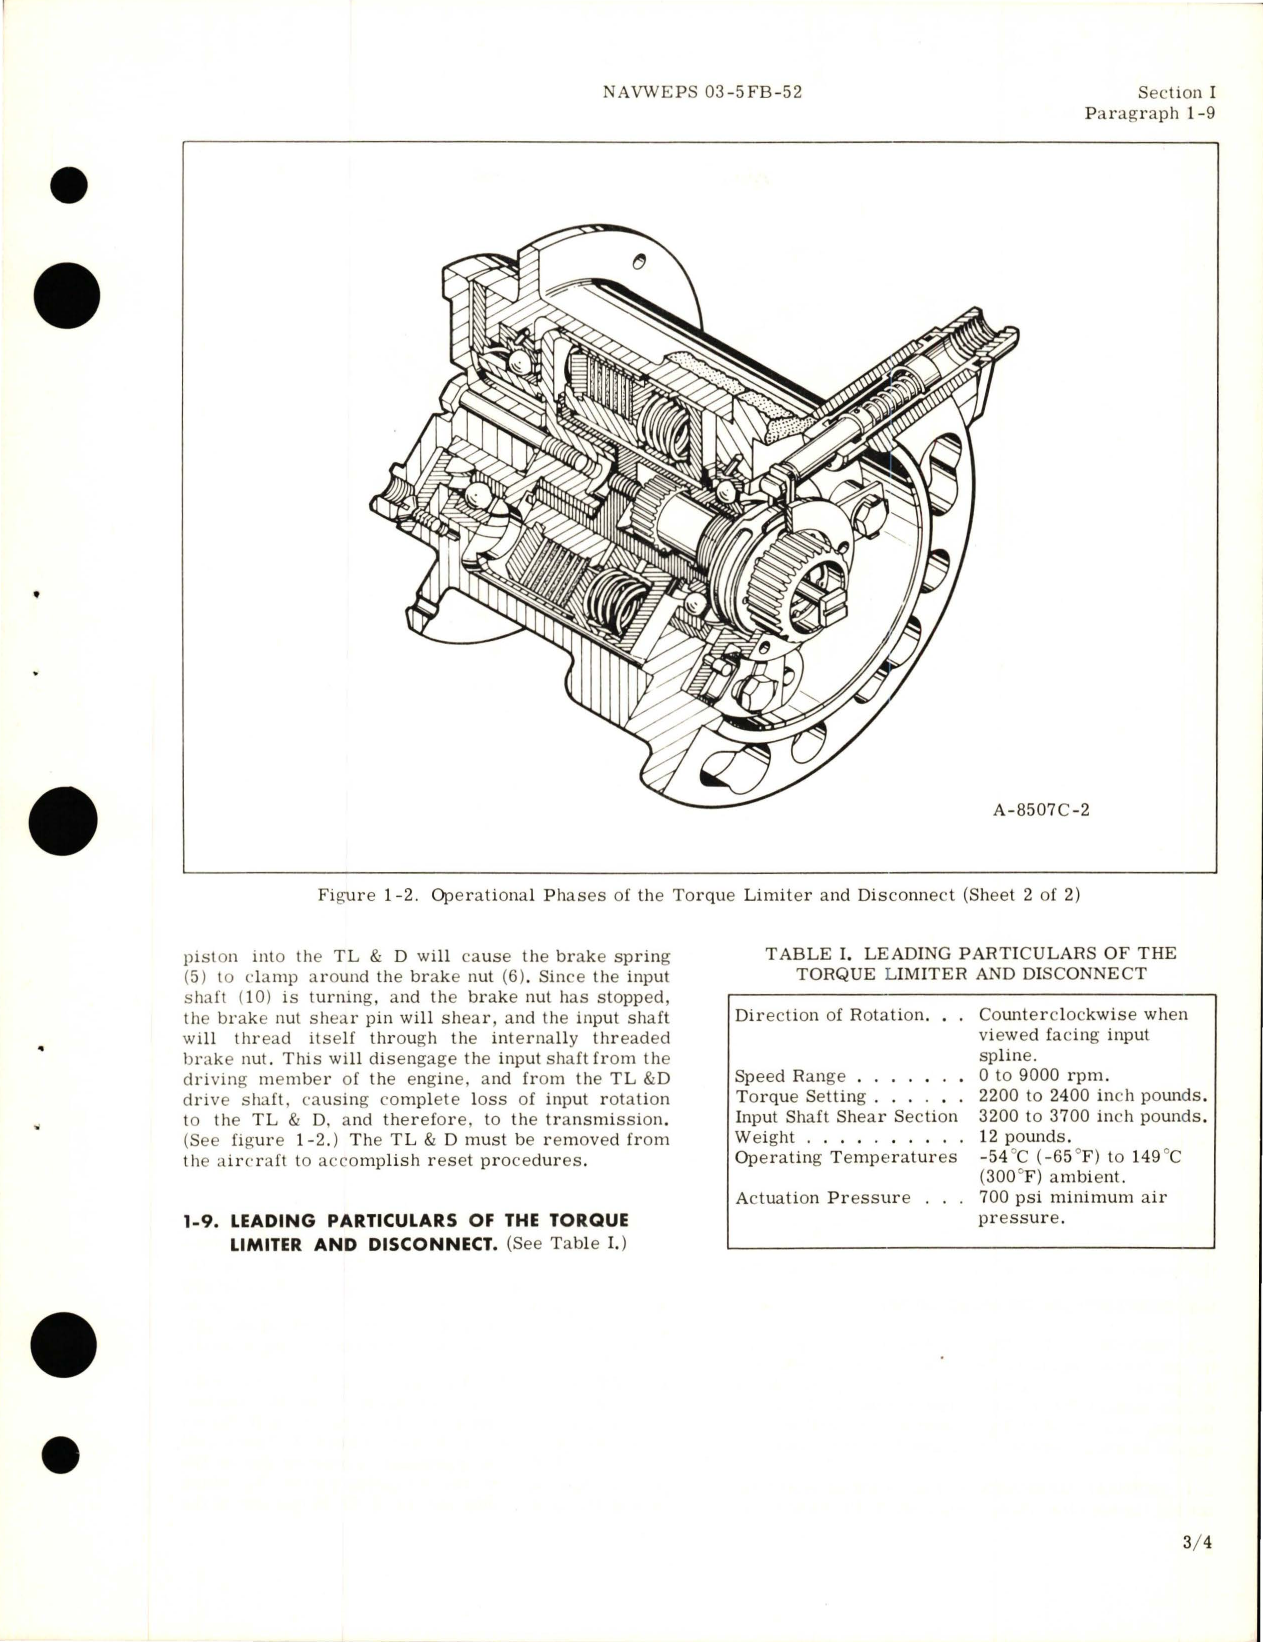 Sample page 7 from AirCorps Library document: Overhaul Instructions for Torque Limiter & Disconnect - Part 683266-2